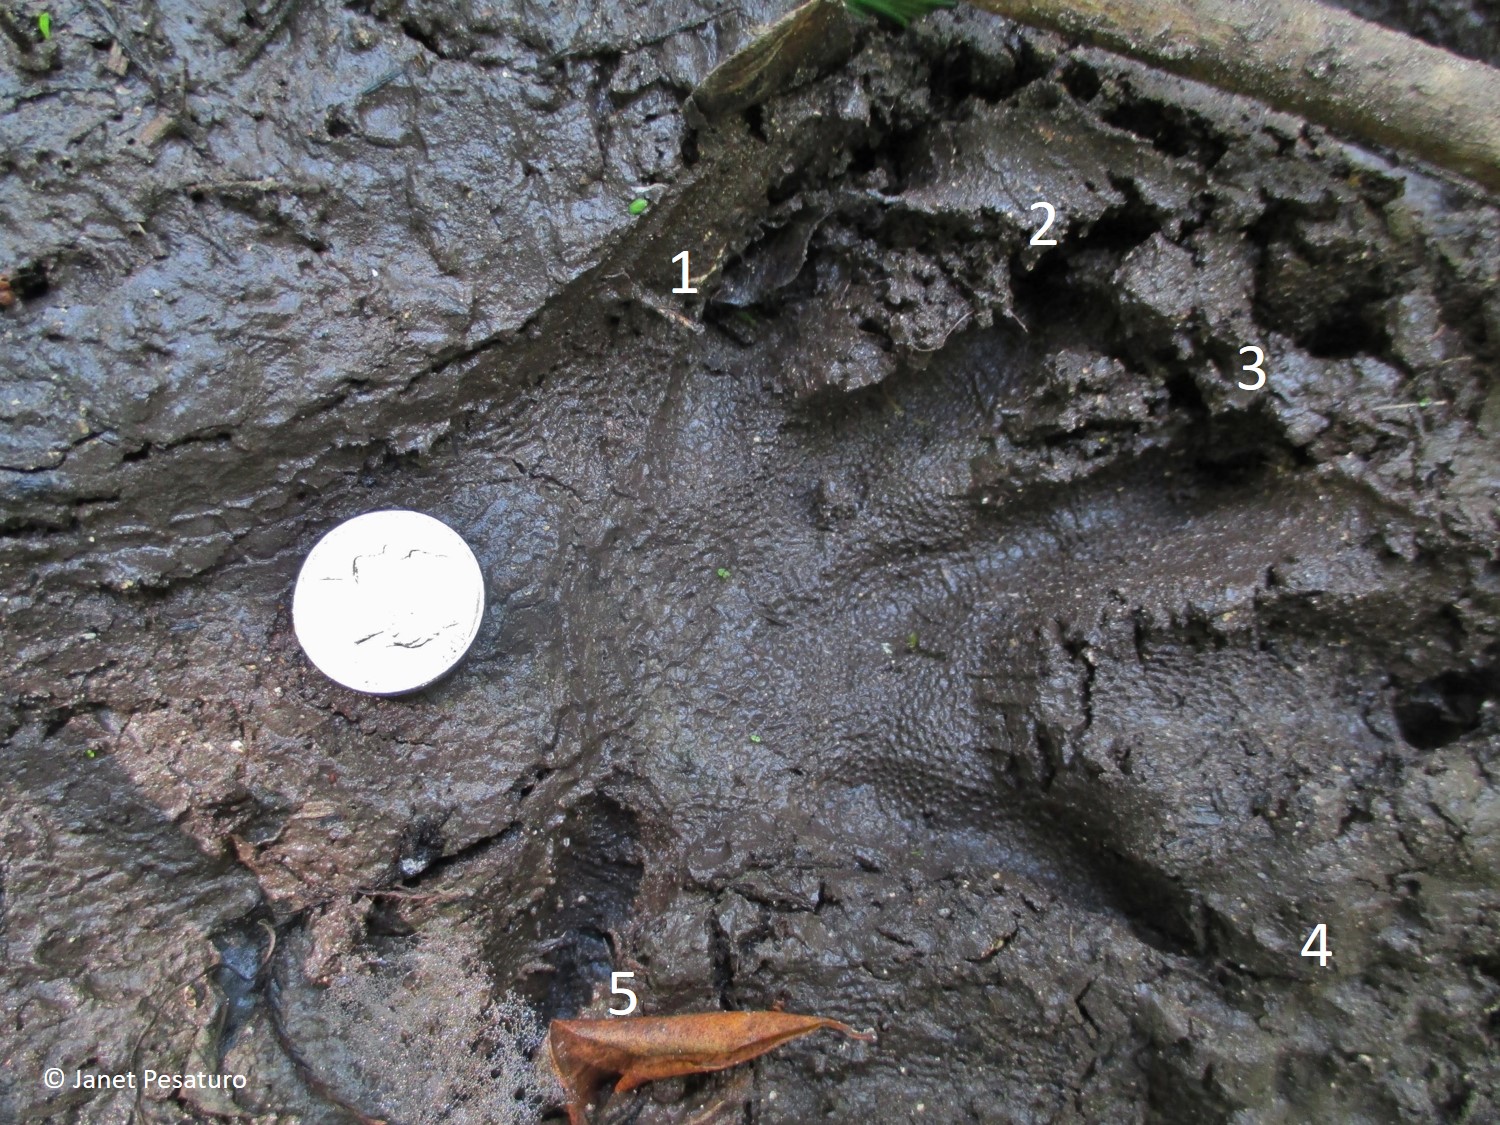 Alligator tracks and sign: A right front track of an alligator